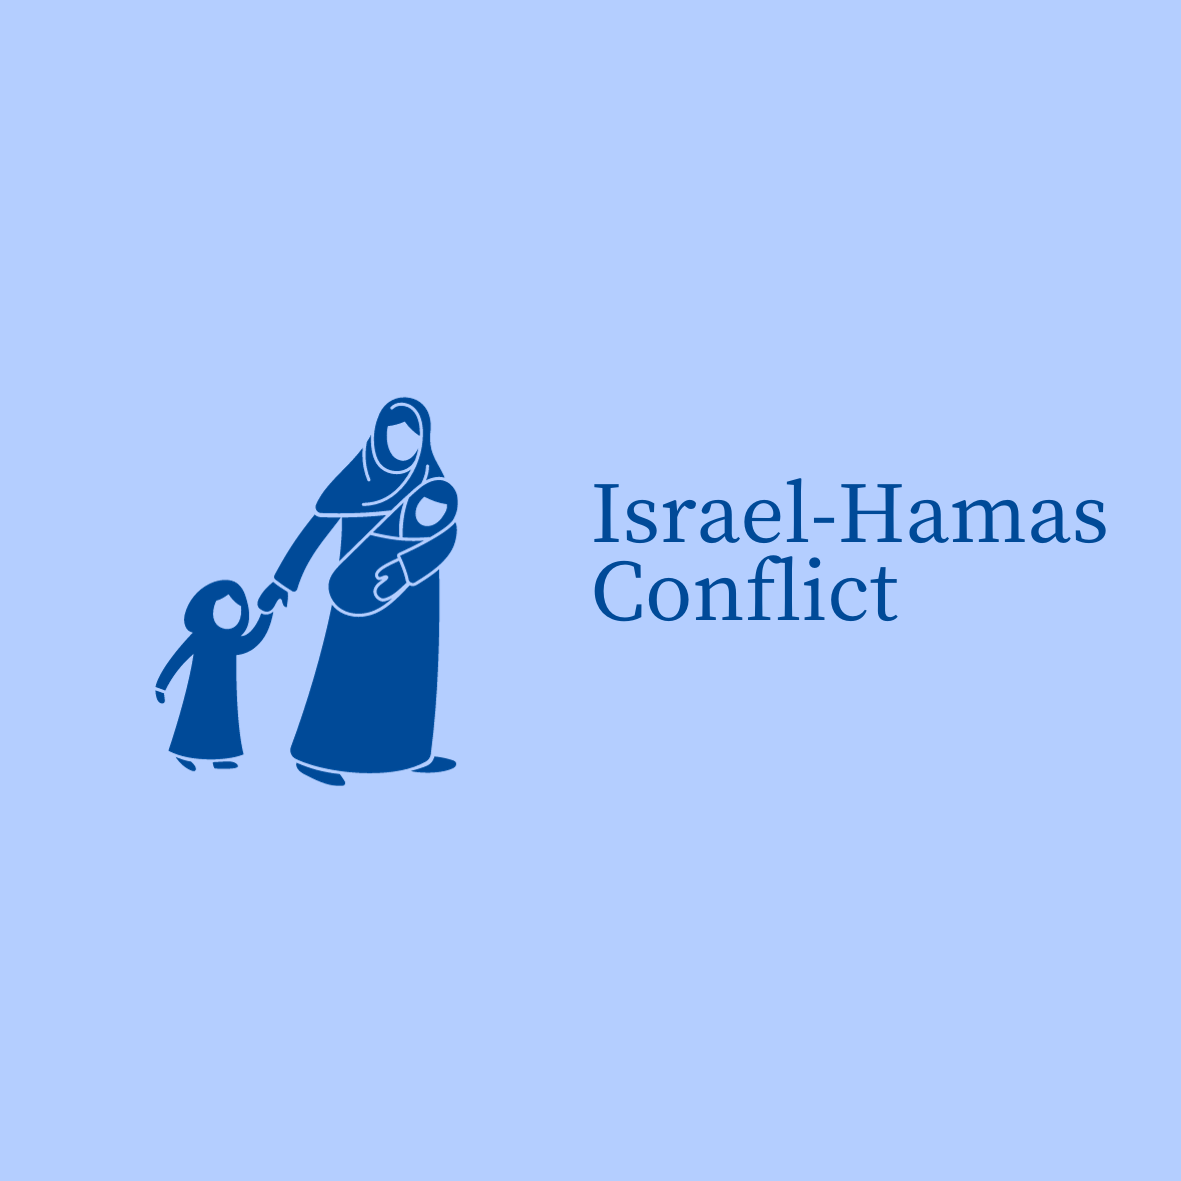 The impact of the Israel-Hamas conflict on trade